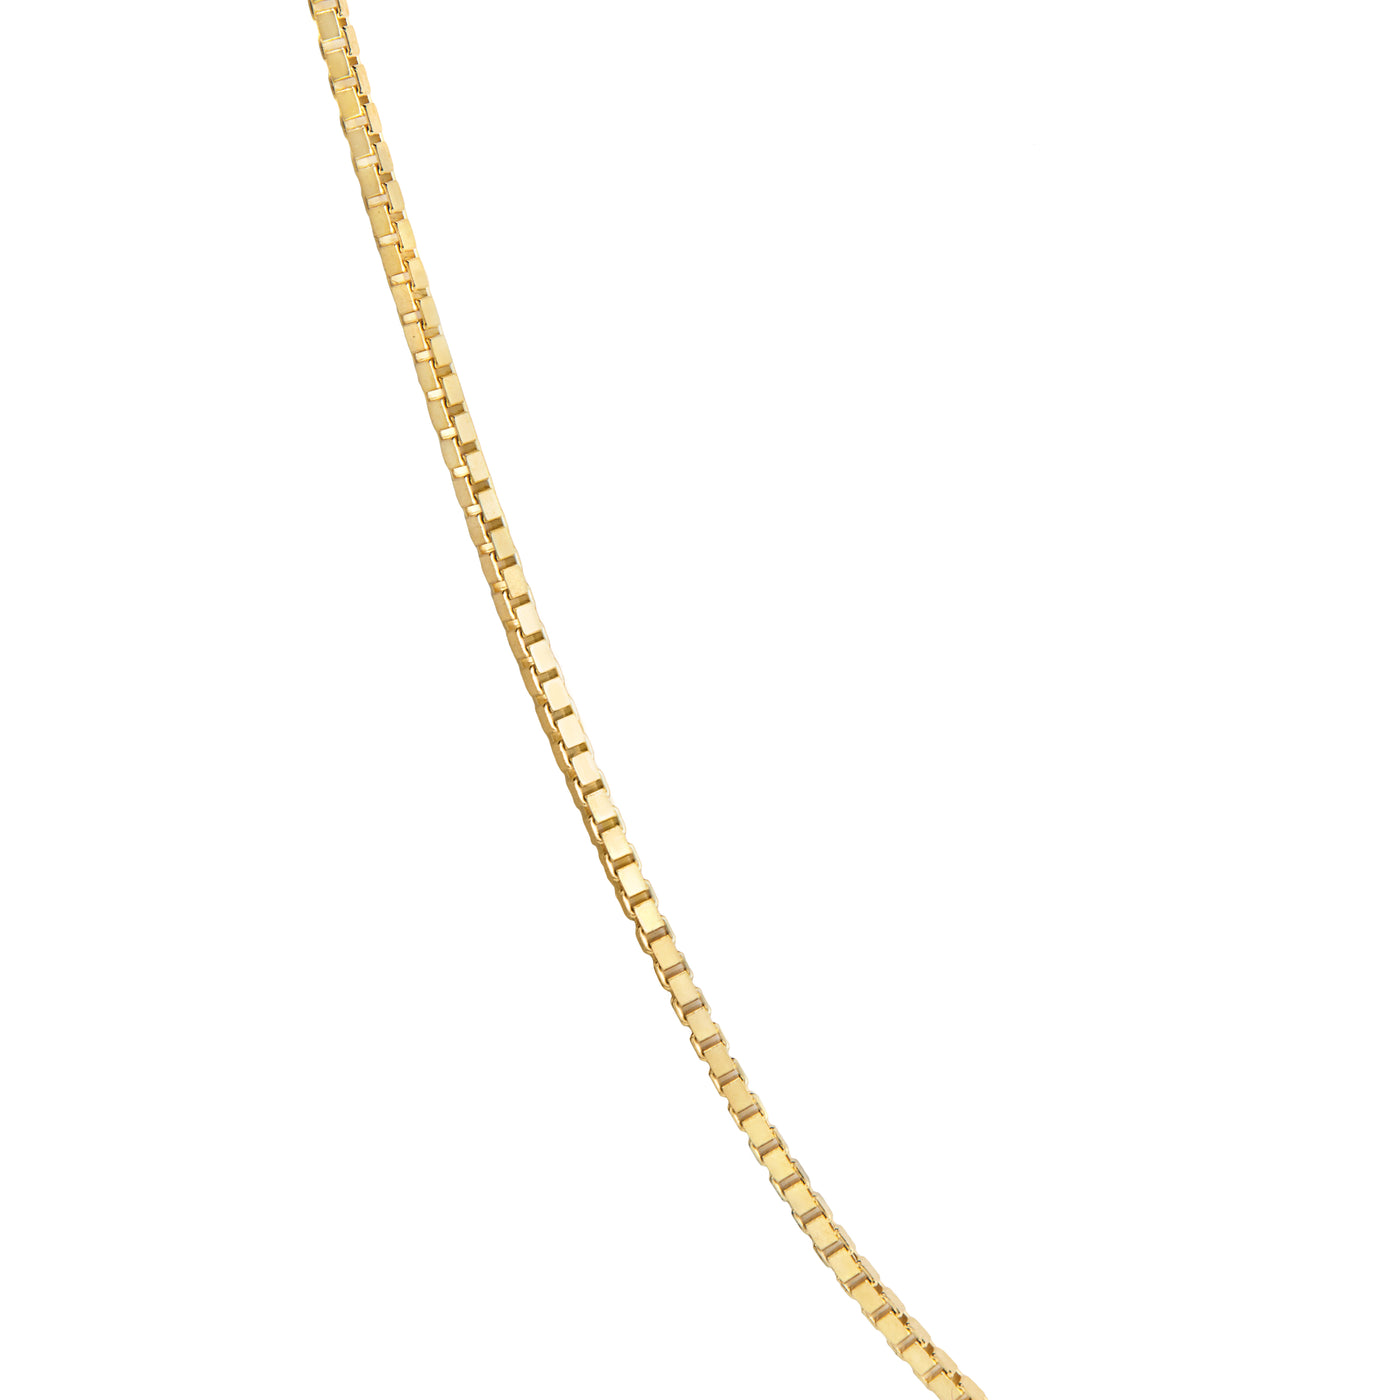 14 Karat Yellow Gold Box Chain Necklace on White Background Zoomed in For Detail